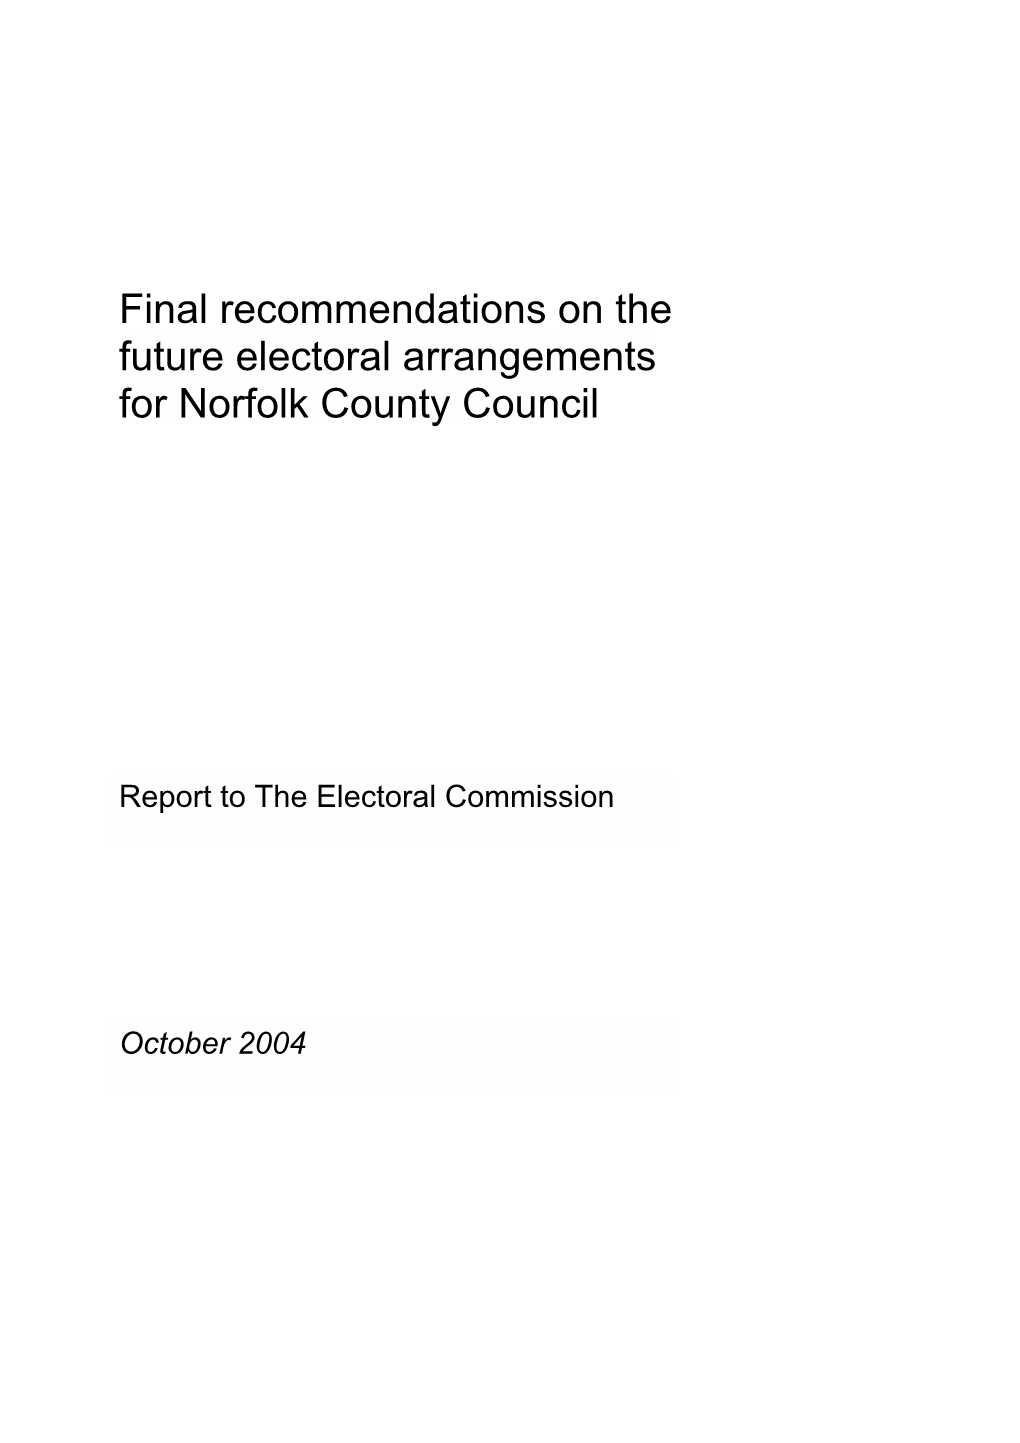 Final Recommendations on the Future Electoral Arrangements for Norfolk County Council